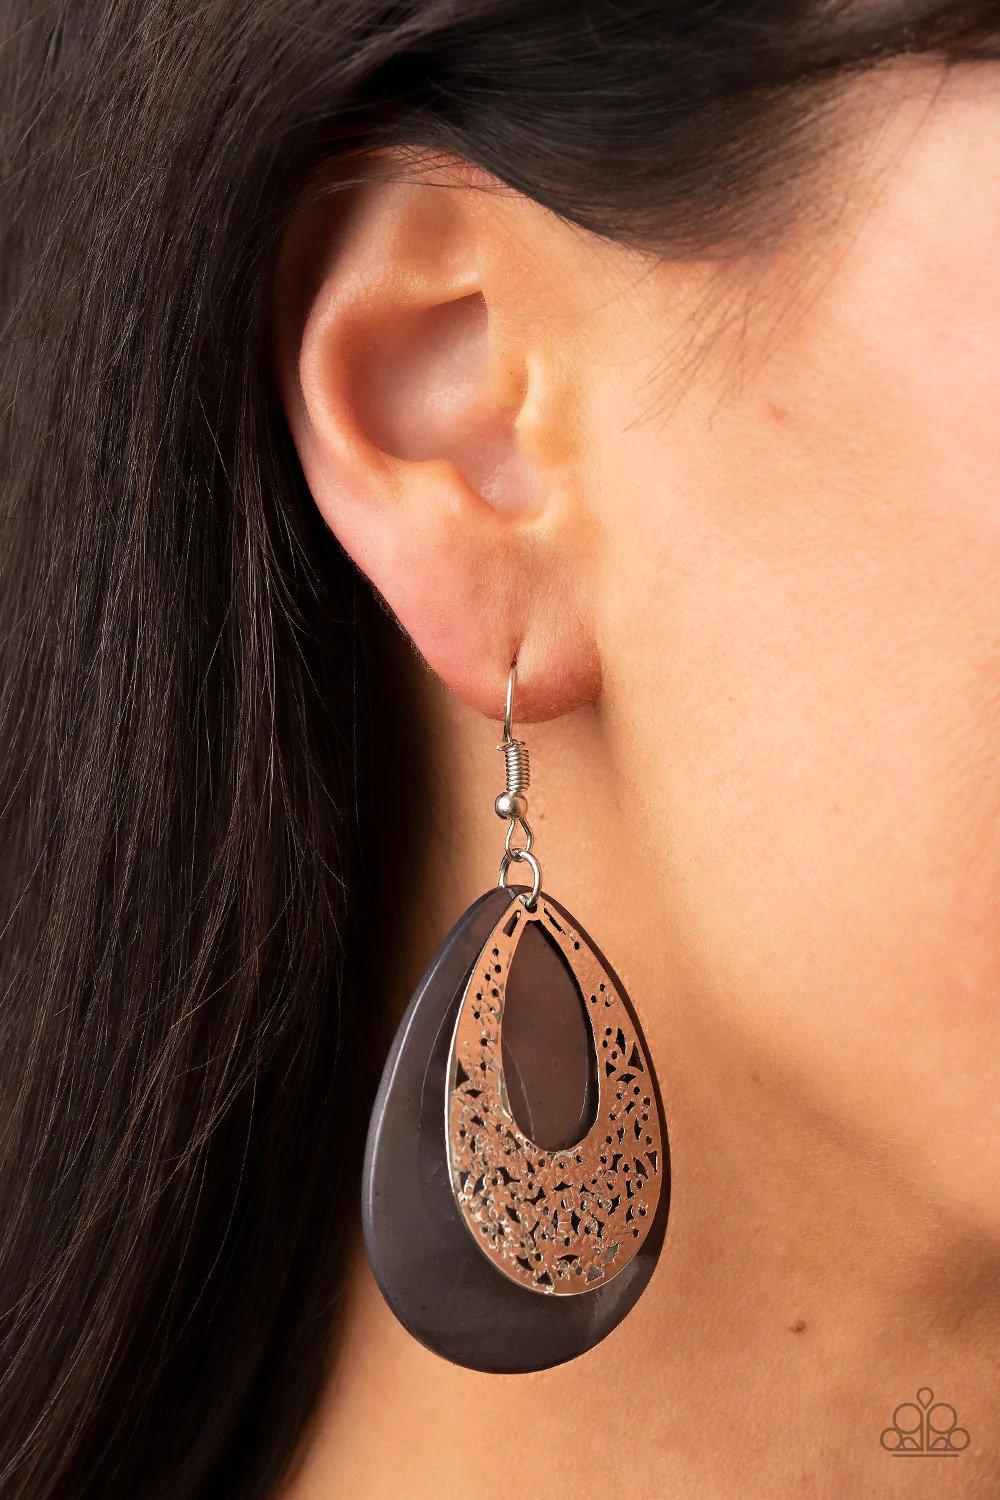 Bountiful Beaches Silver Earrings - Paparazzi Accessories- lightbox - CarasShop.com - $5 Jewelry by Cara Jewels